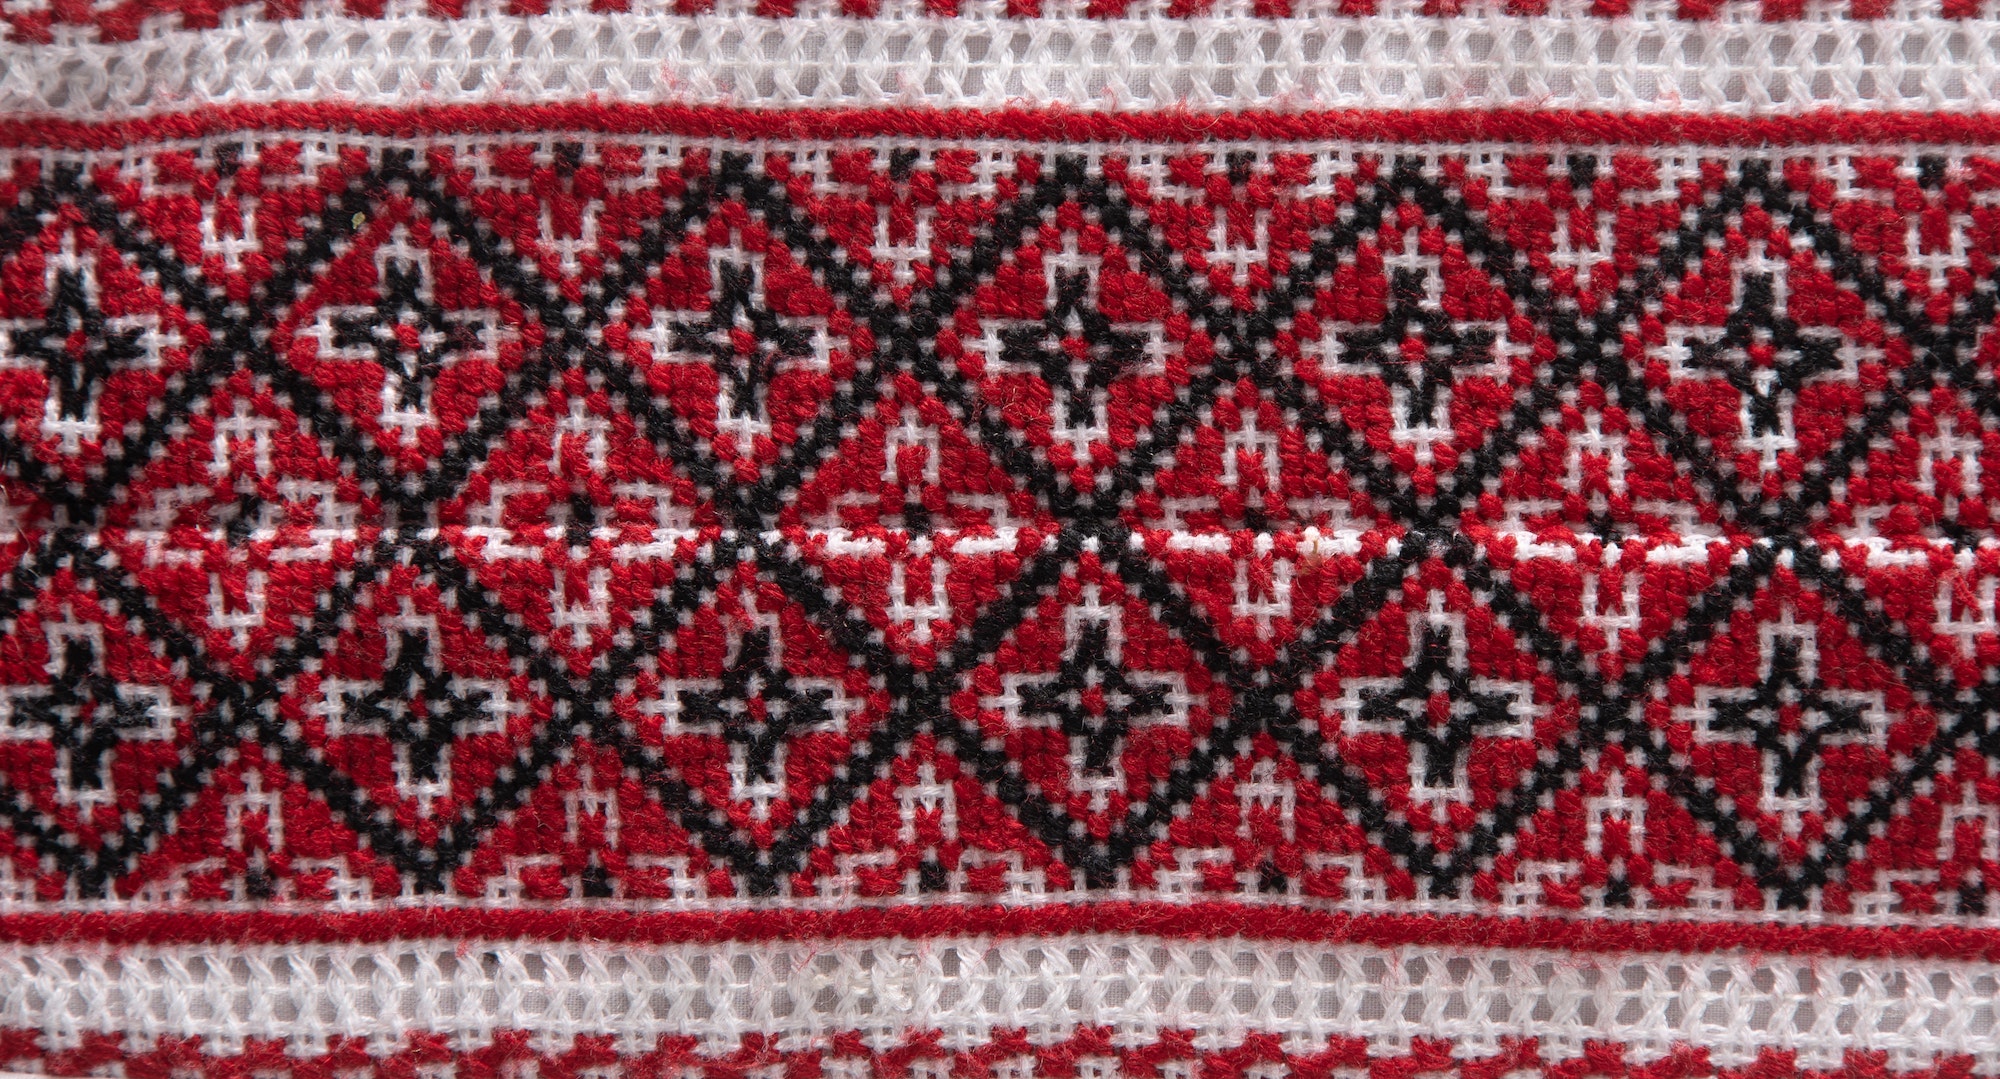 National Ukrainian embroidery. Handmade. Cross stitch in red, black and white. Traditional shirt of